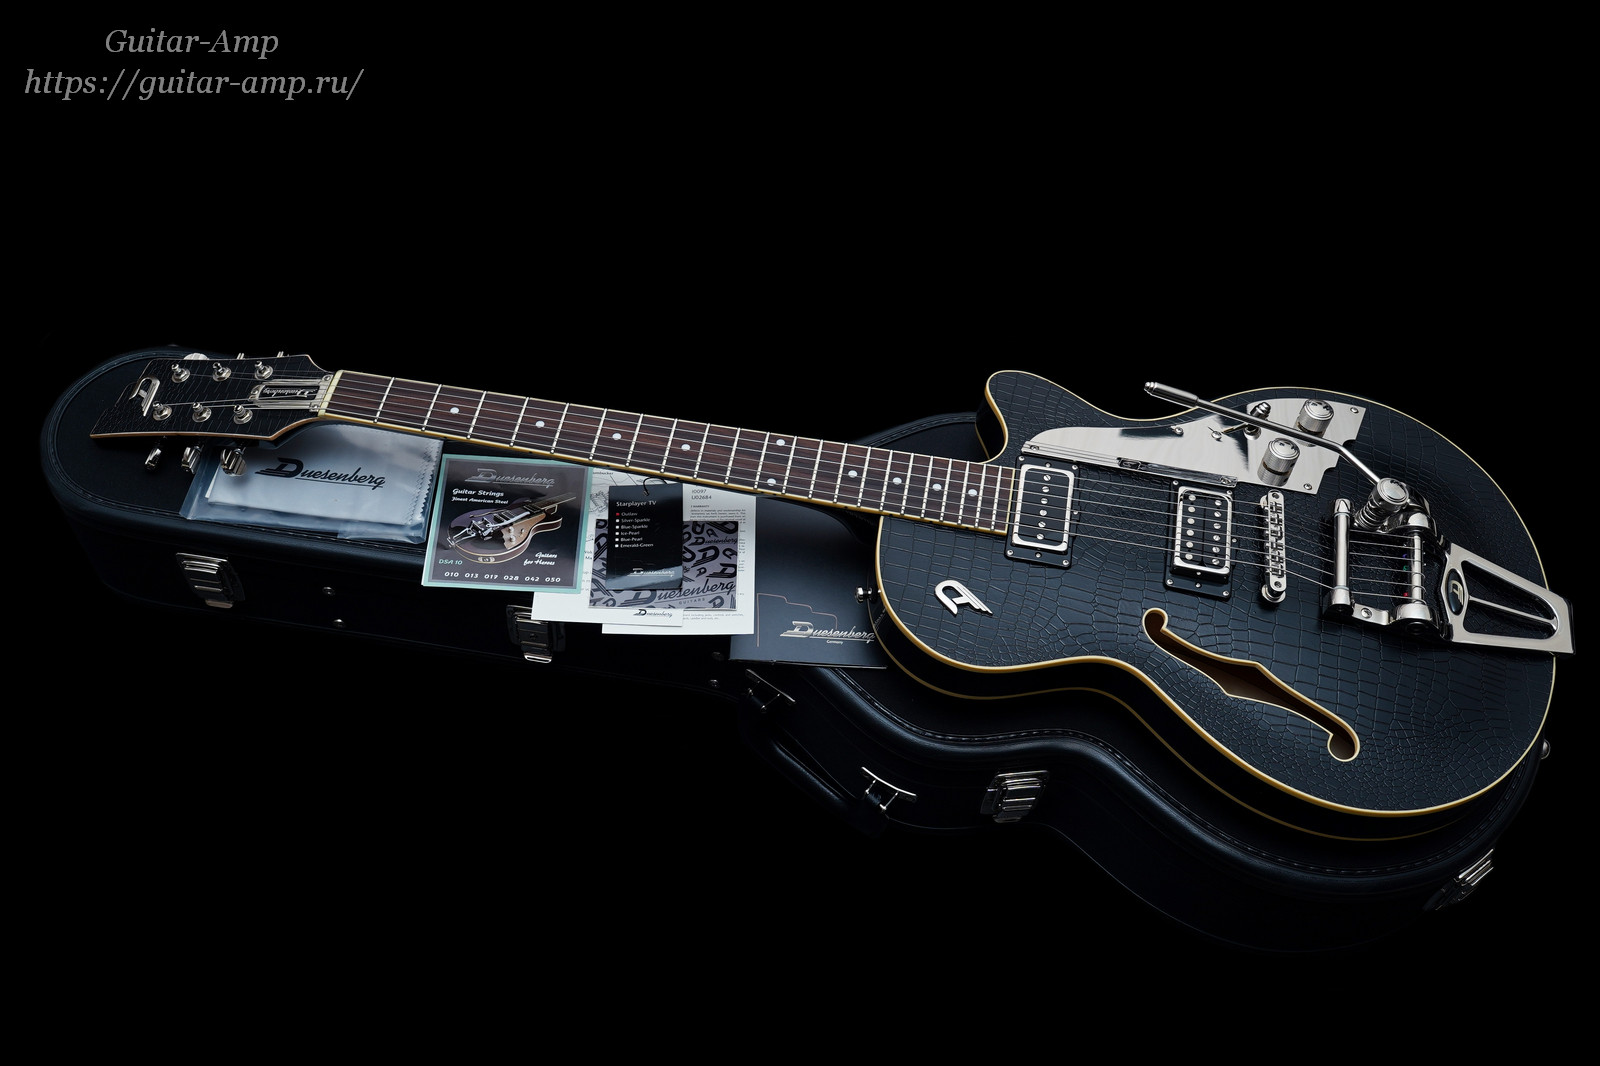 Duesenberg Starplayer TV Outlaw Limited Run with Tremolo System 2010 01_x1600.jpg